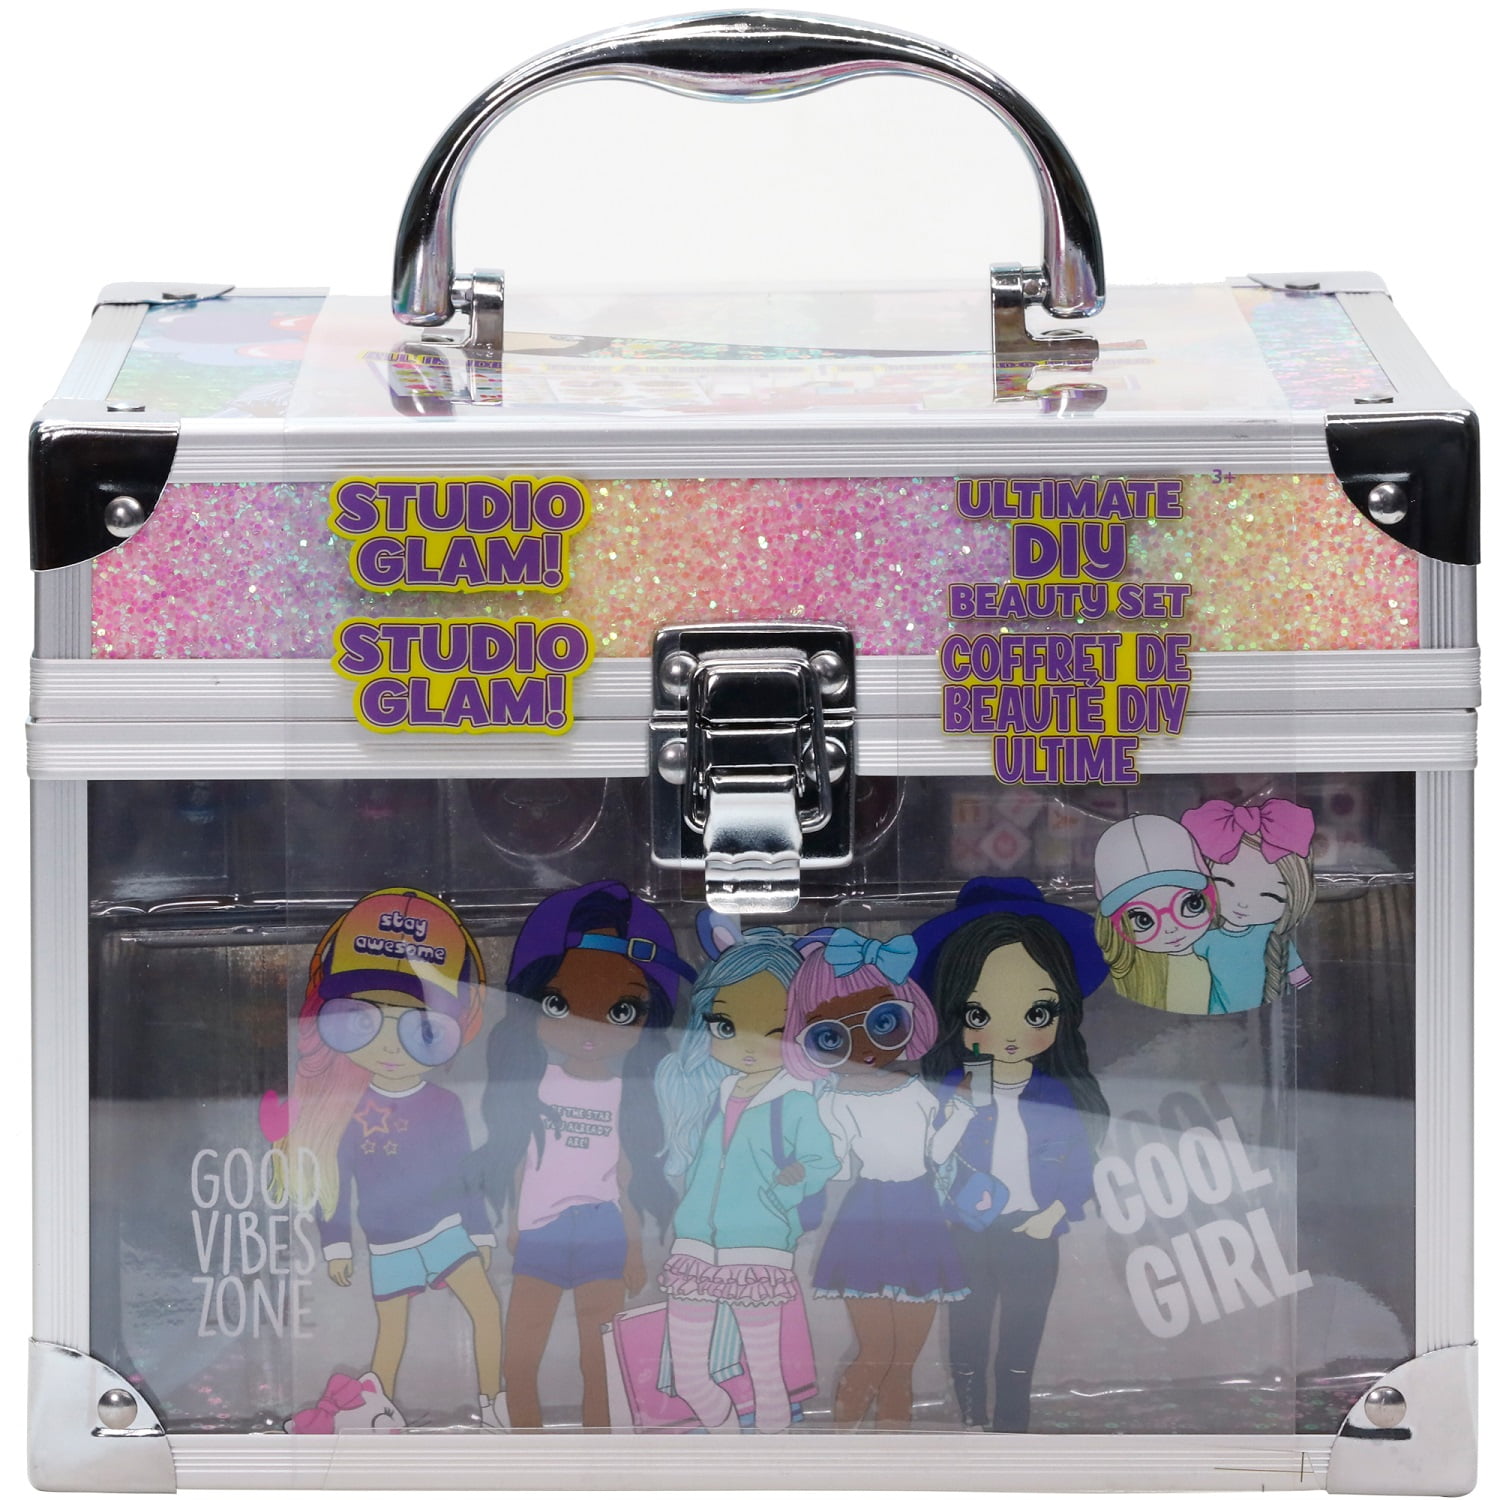 Townley Girl DIY Studio Train Case Makeup Beauty Glam Set for Girls Ages 6+